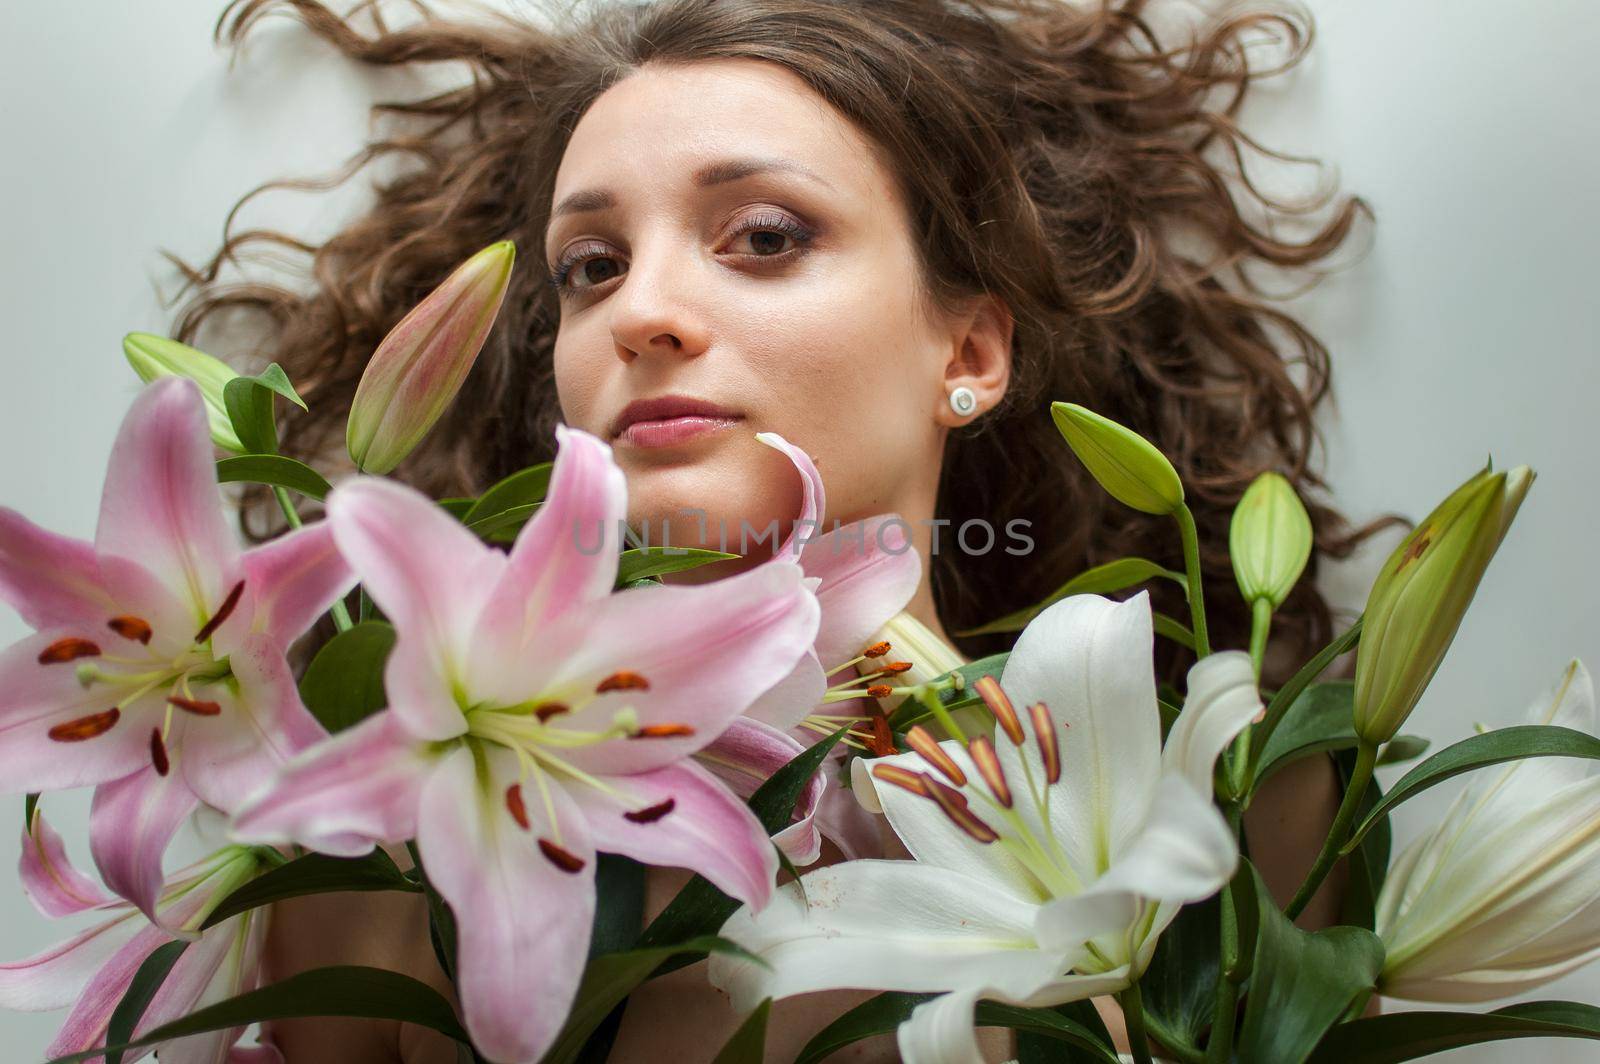 Top view of beautiful woman lying on the table with perfect bouquet of beautiful lilies, female portrait concept.